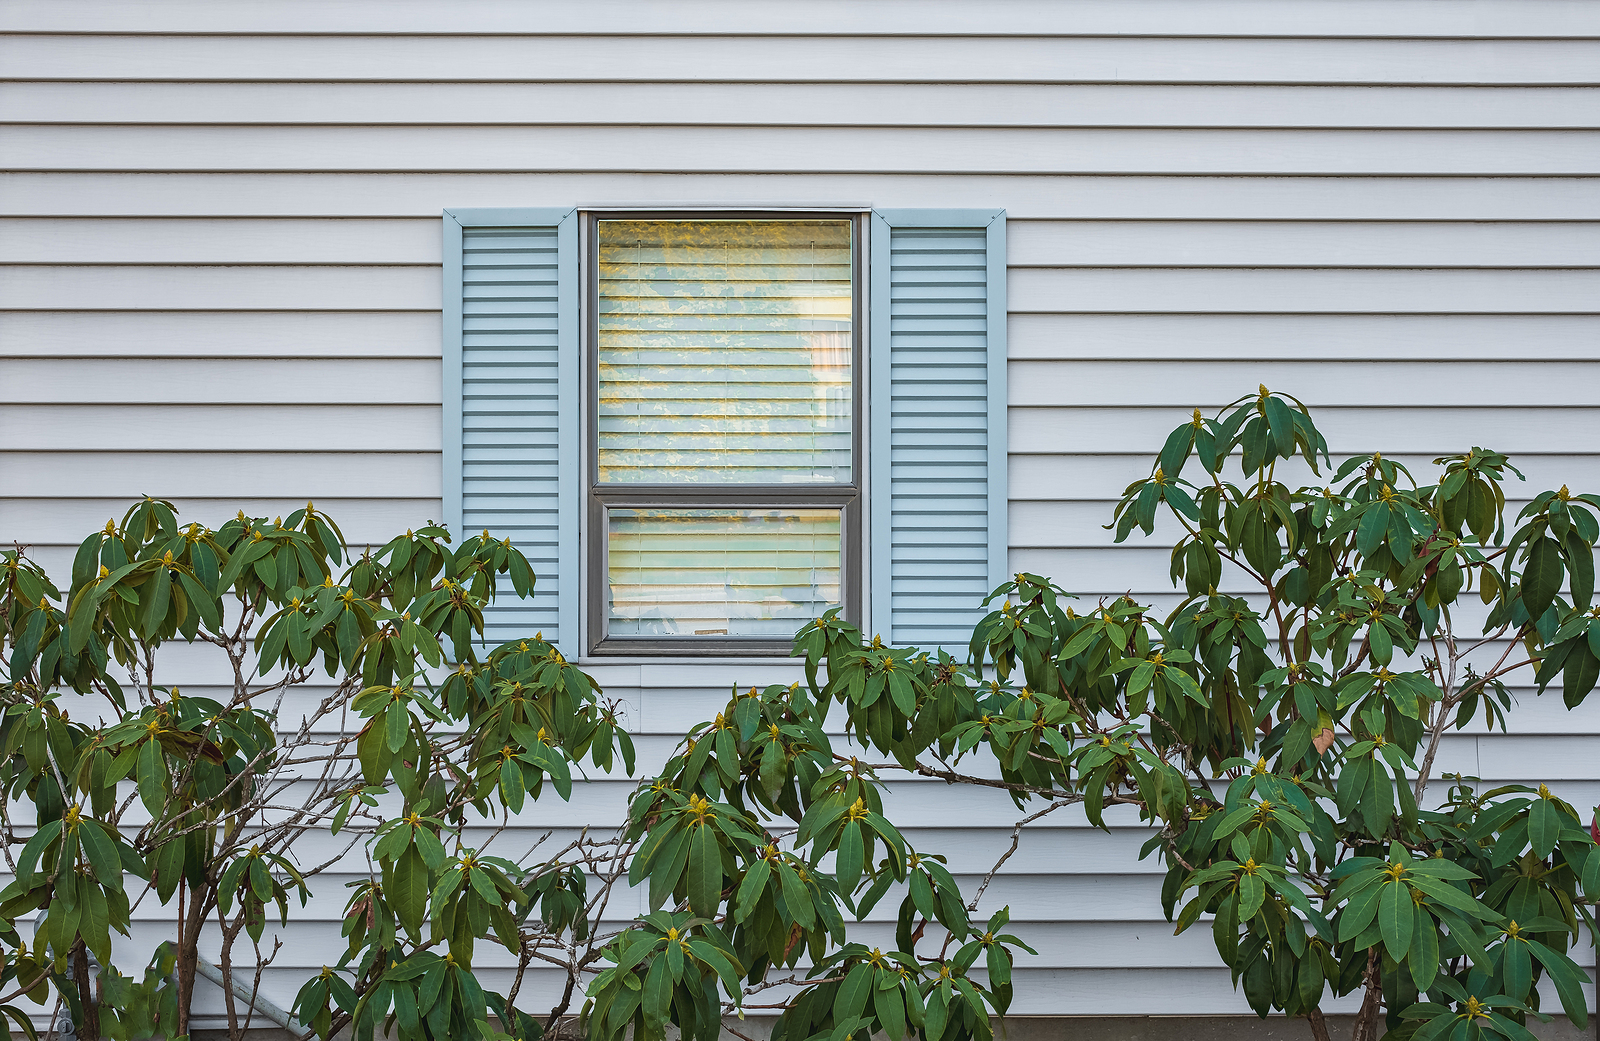 Modern Residential Window With Shutters And Trees In A Garden. G